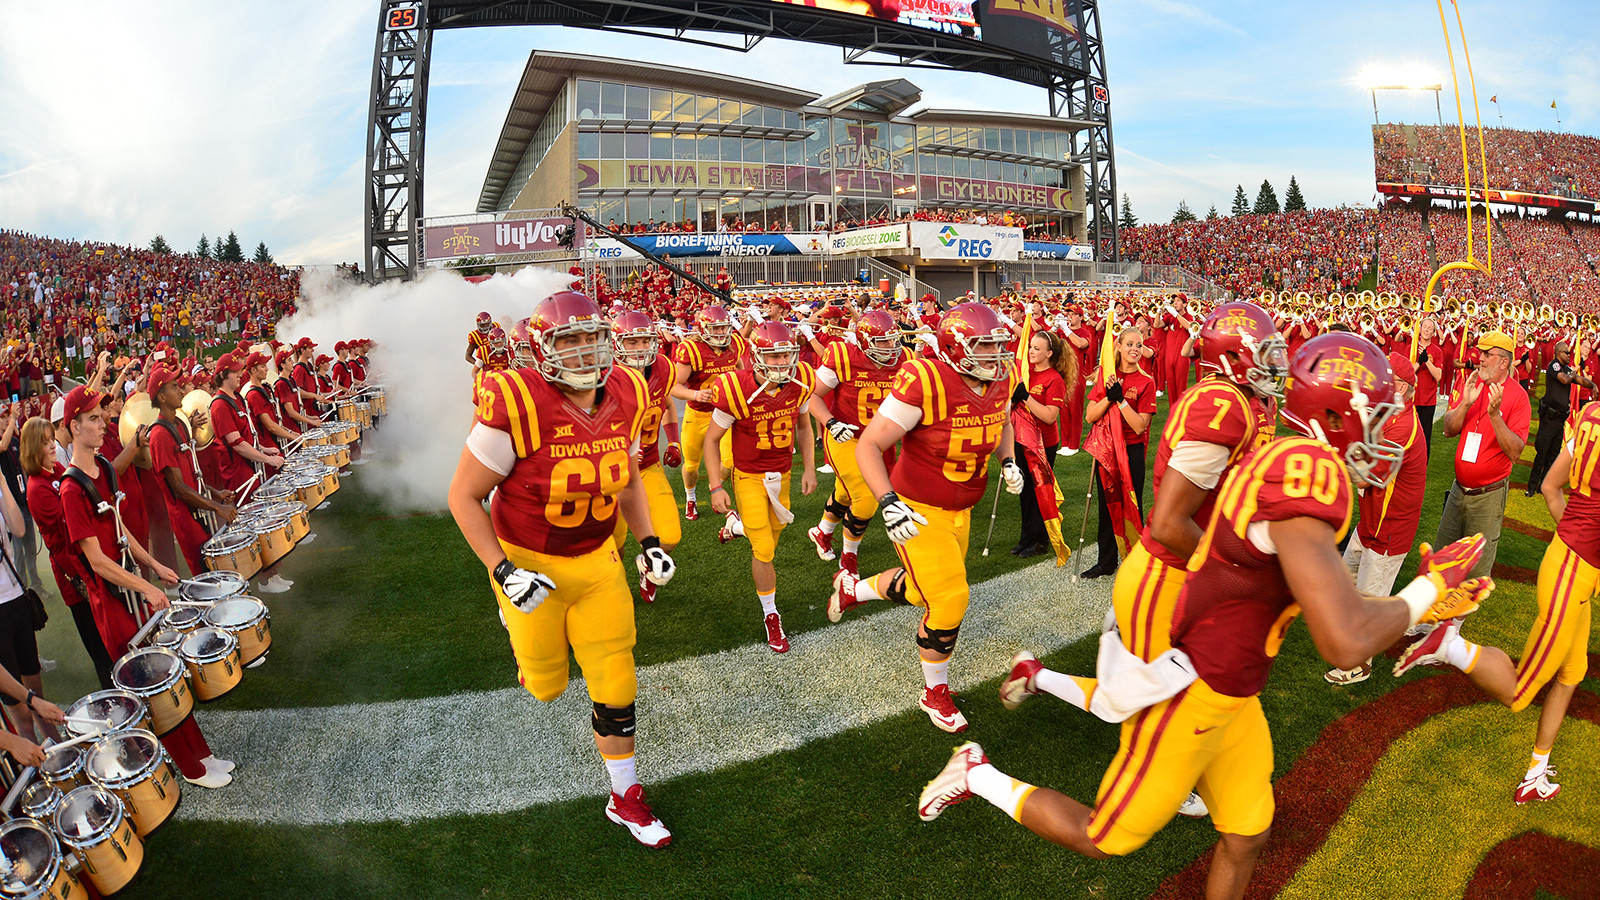 free-download-2016-football-schedule-released-iowa-state-university